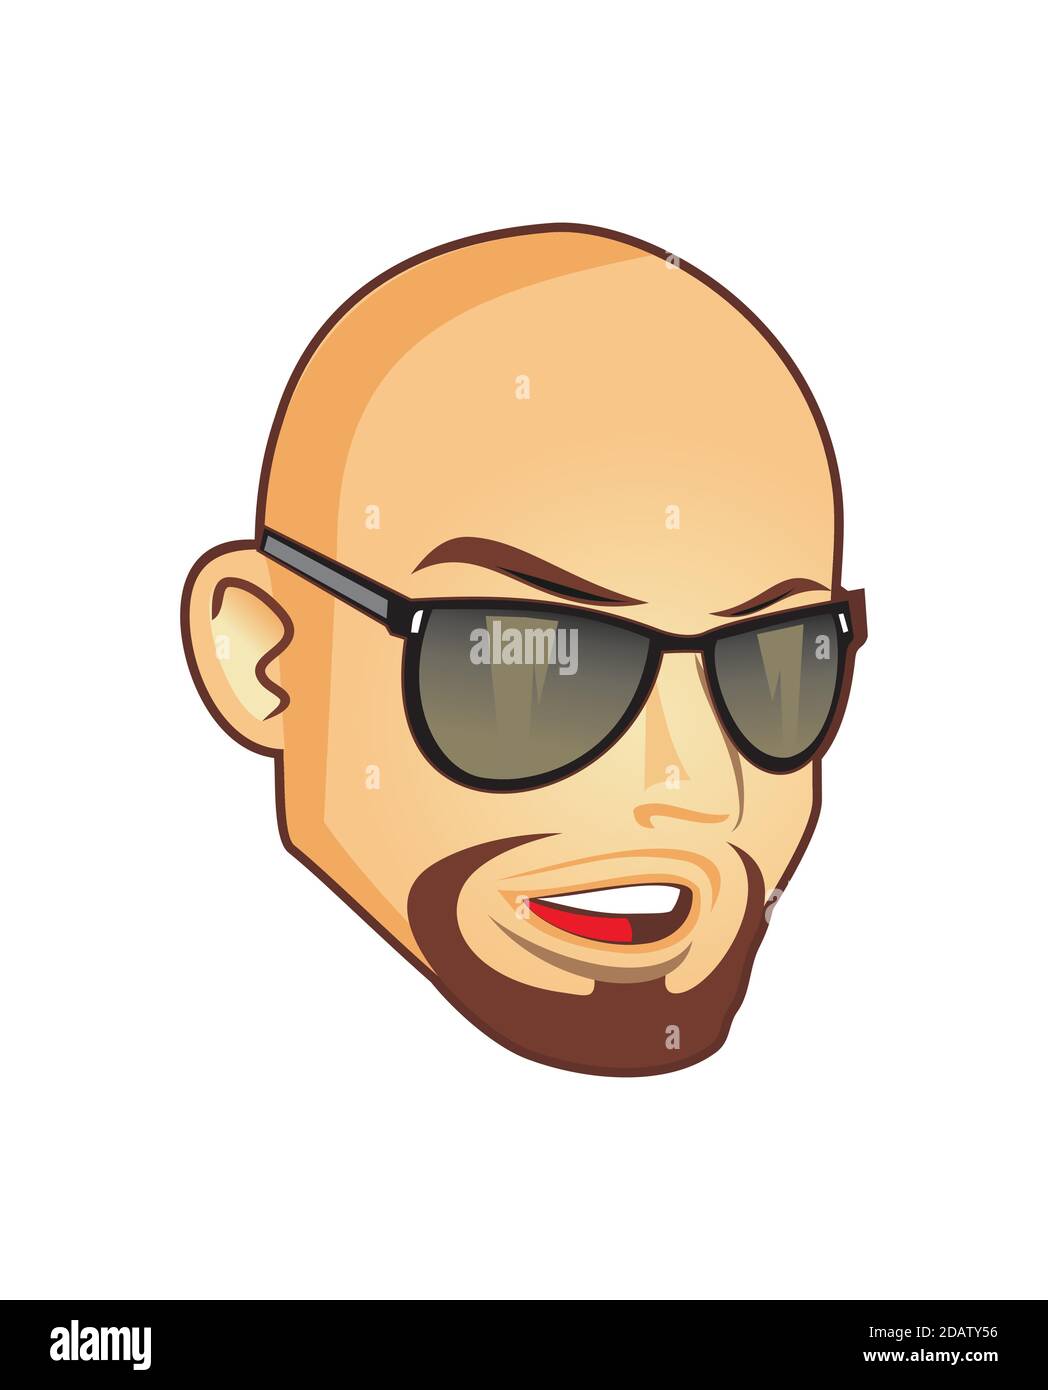 Cool bald guy head wearing sunglass design illustration vector eps format , suitable for your design needs, logo, illustration, animation, etc. Stock Vector